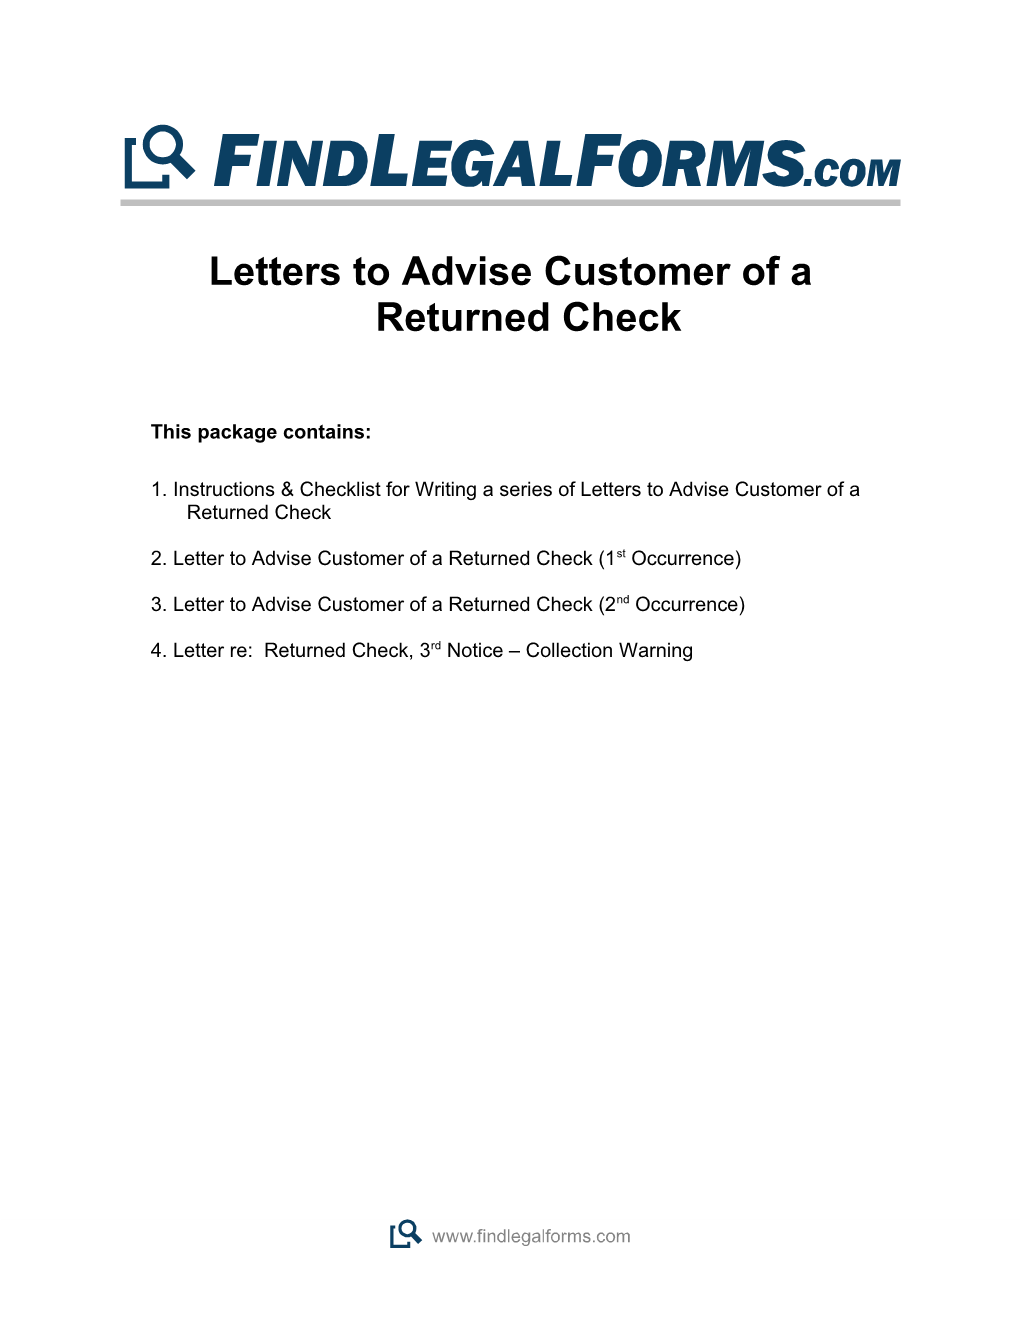 Letters to Advise Customer of a Returned Check